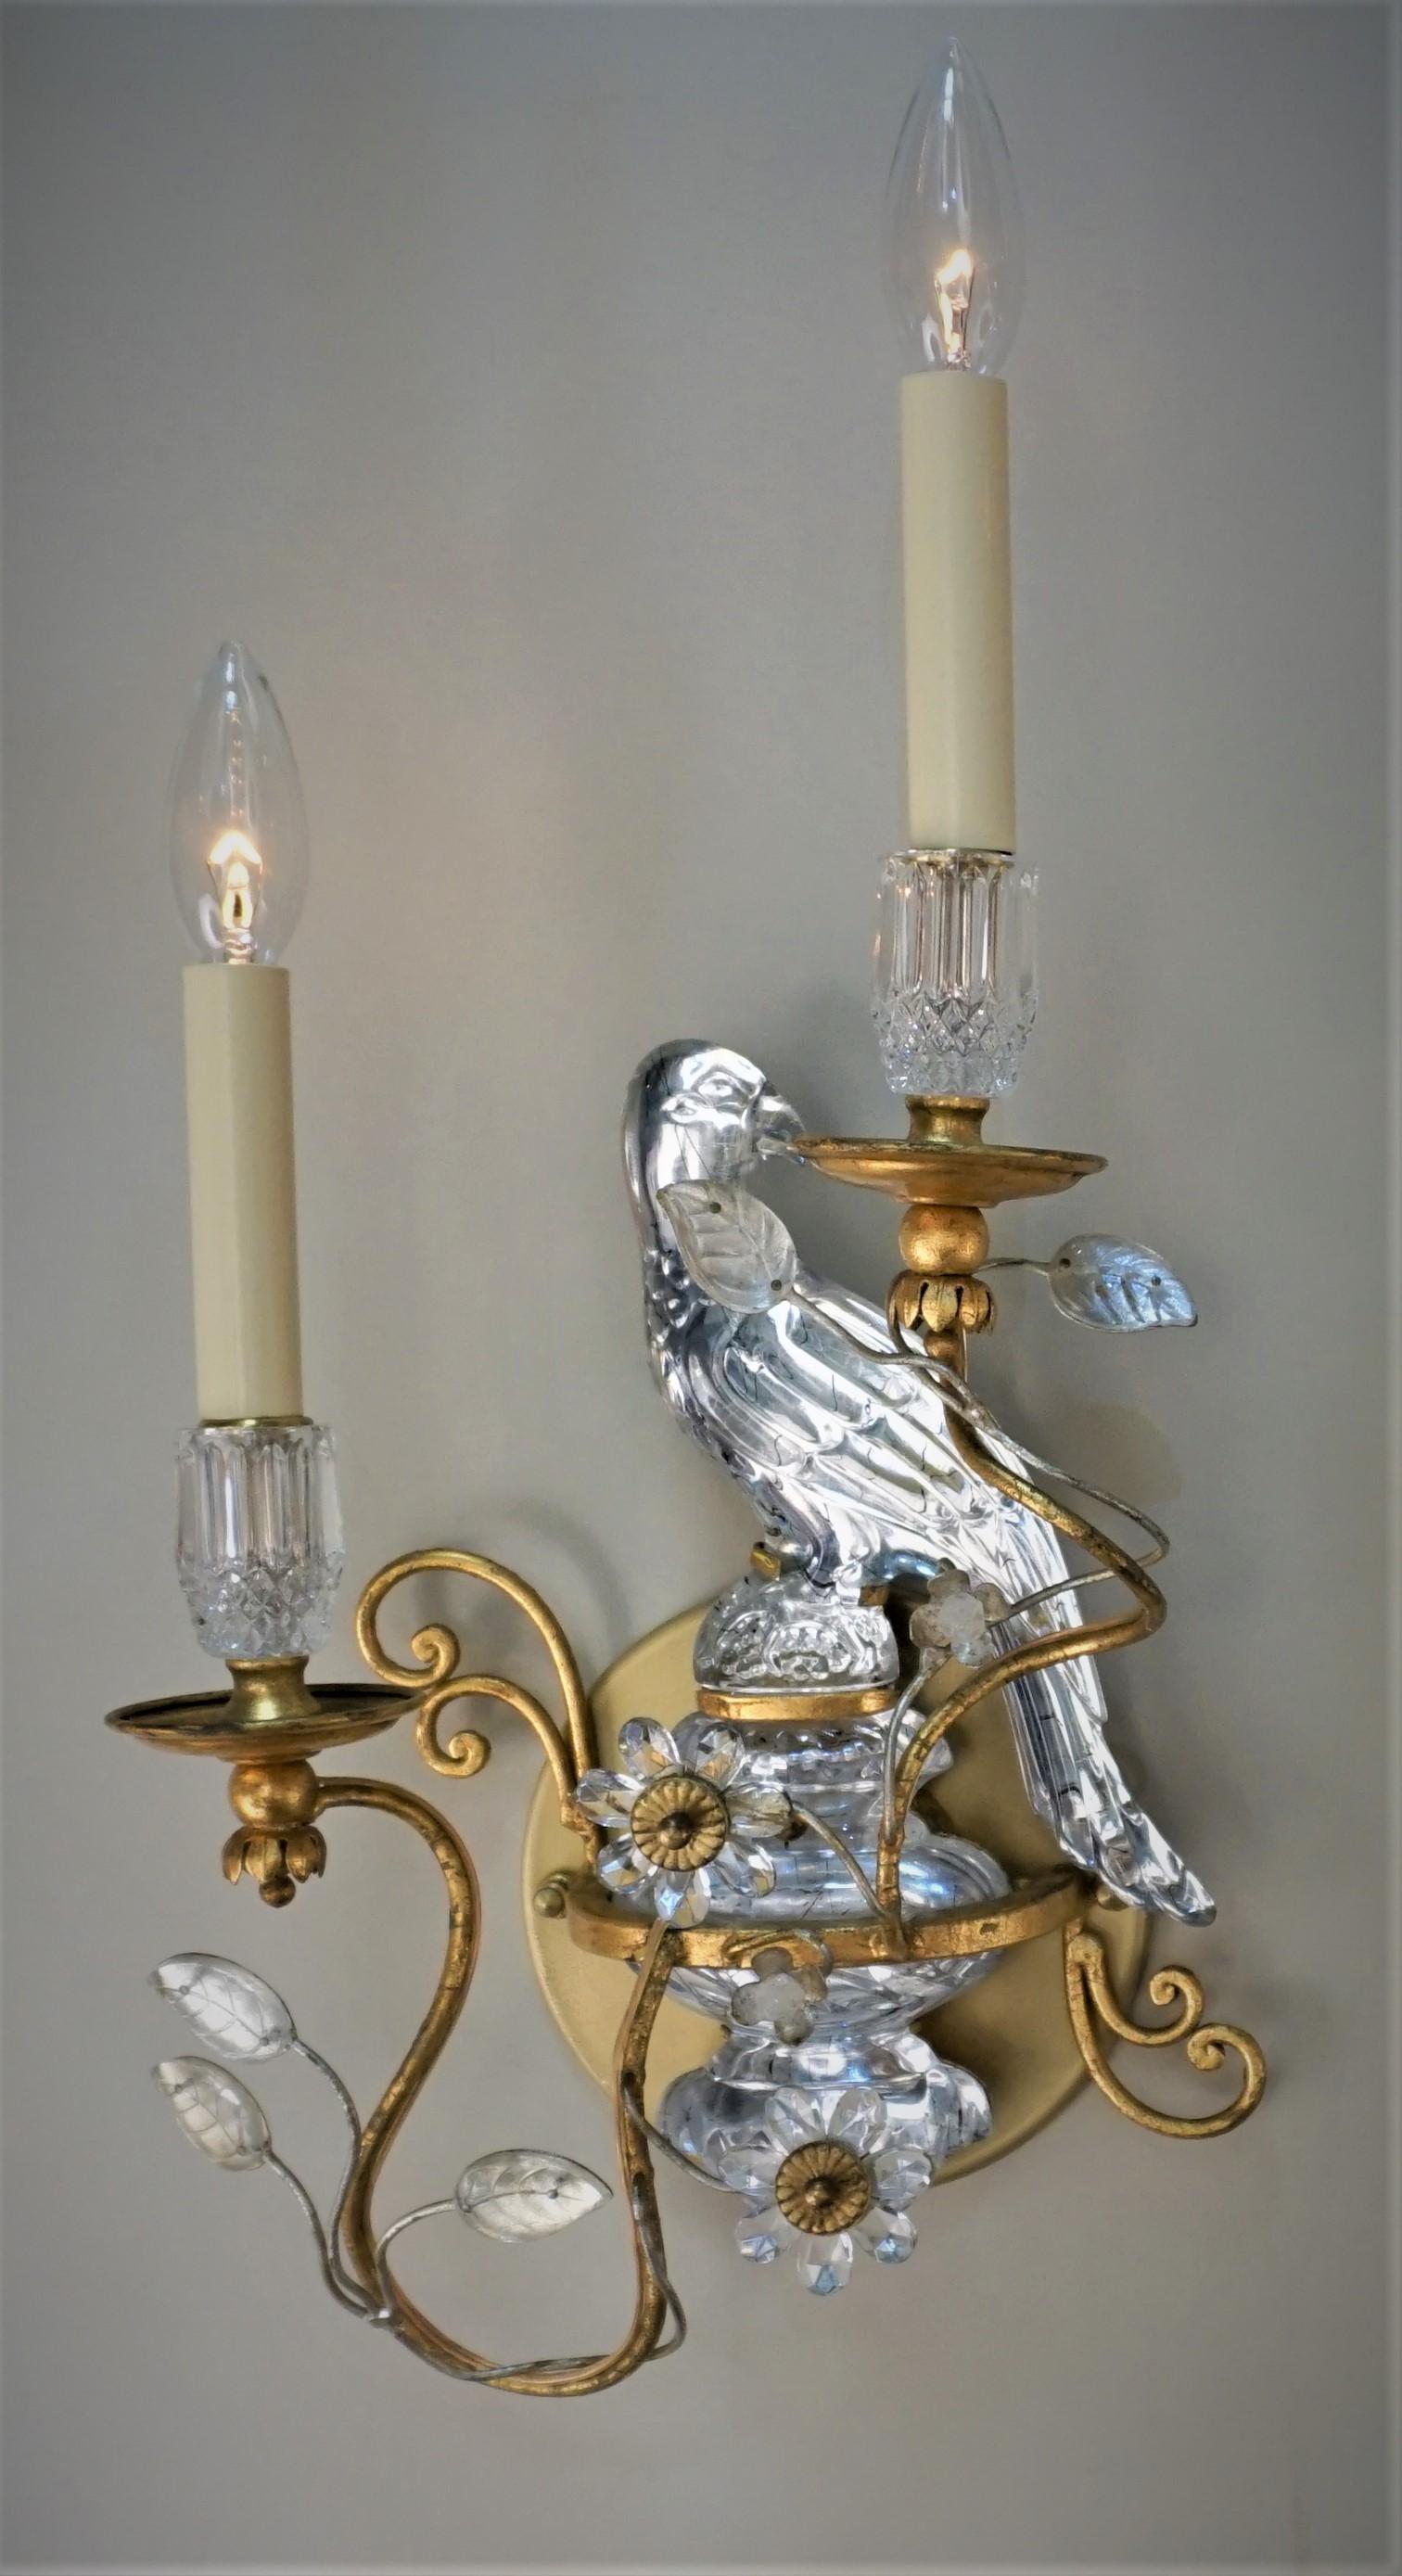 Beautiful pair of gilt metal and crystal parrots' and flora design wall sconces.
Back plates have been added to cover your electrical box.